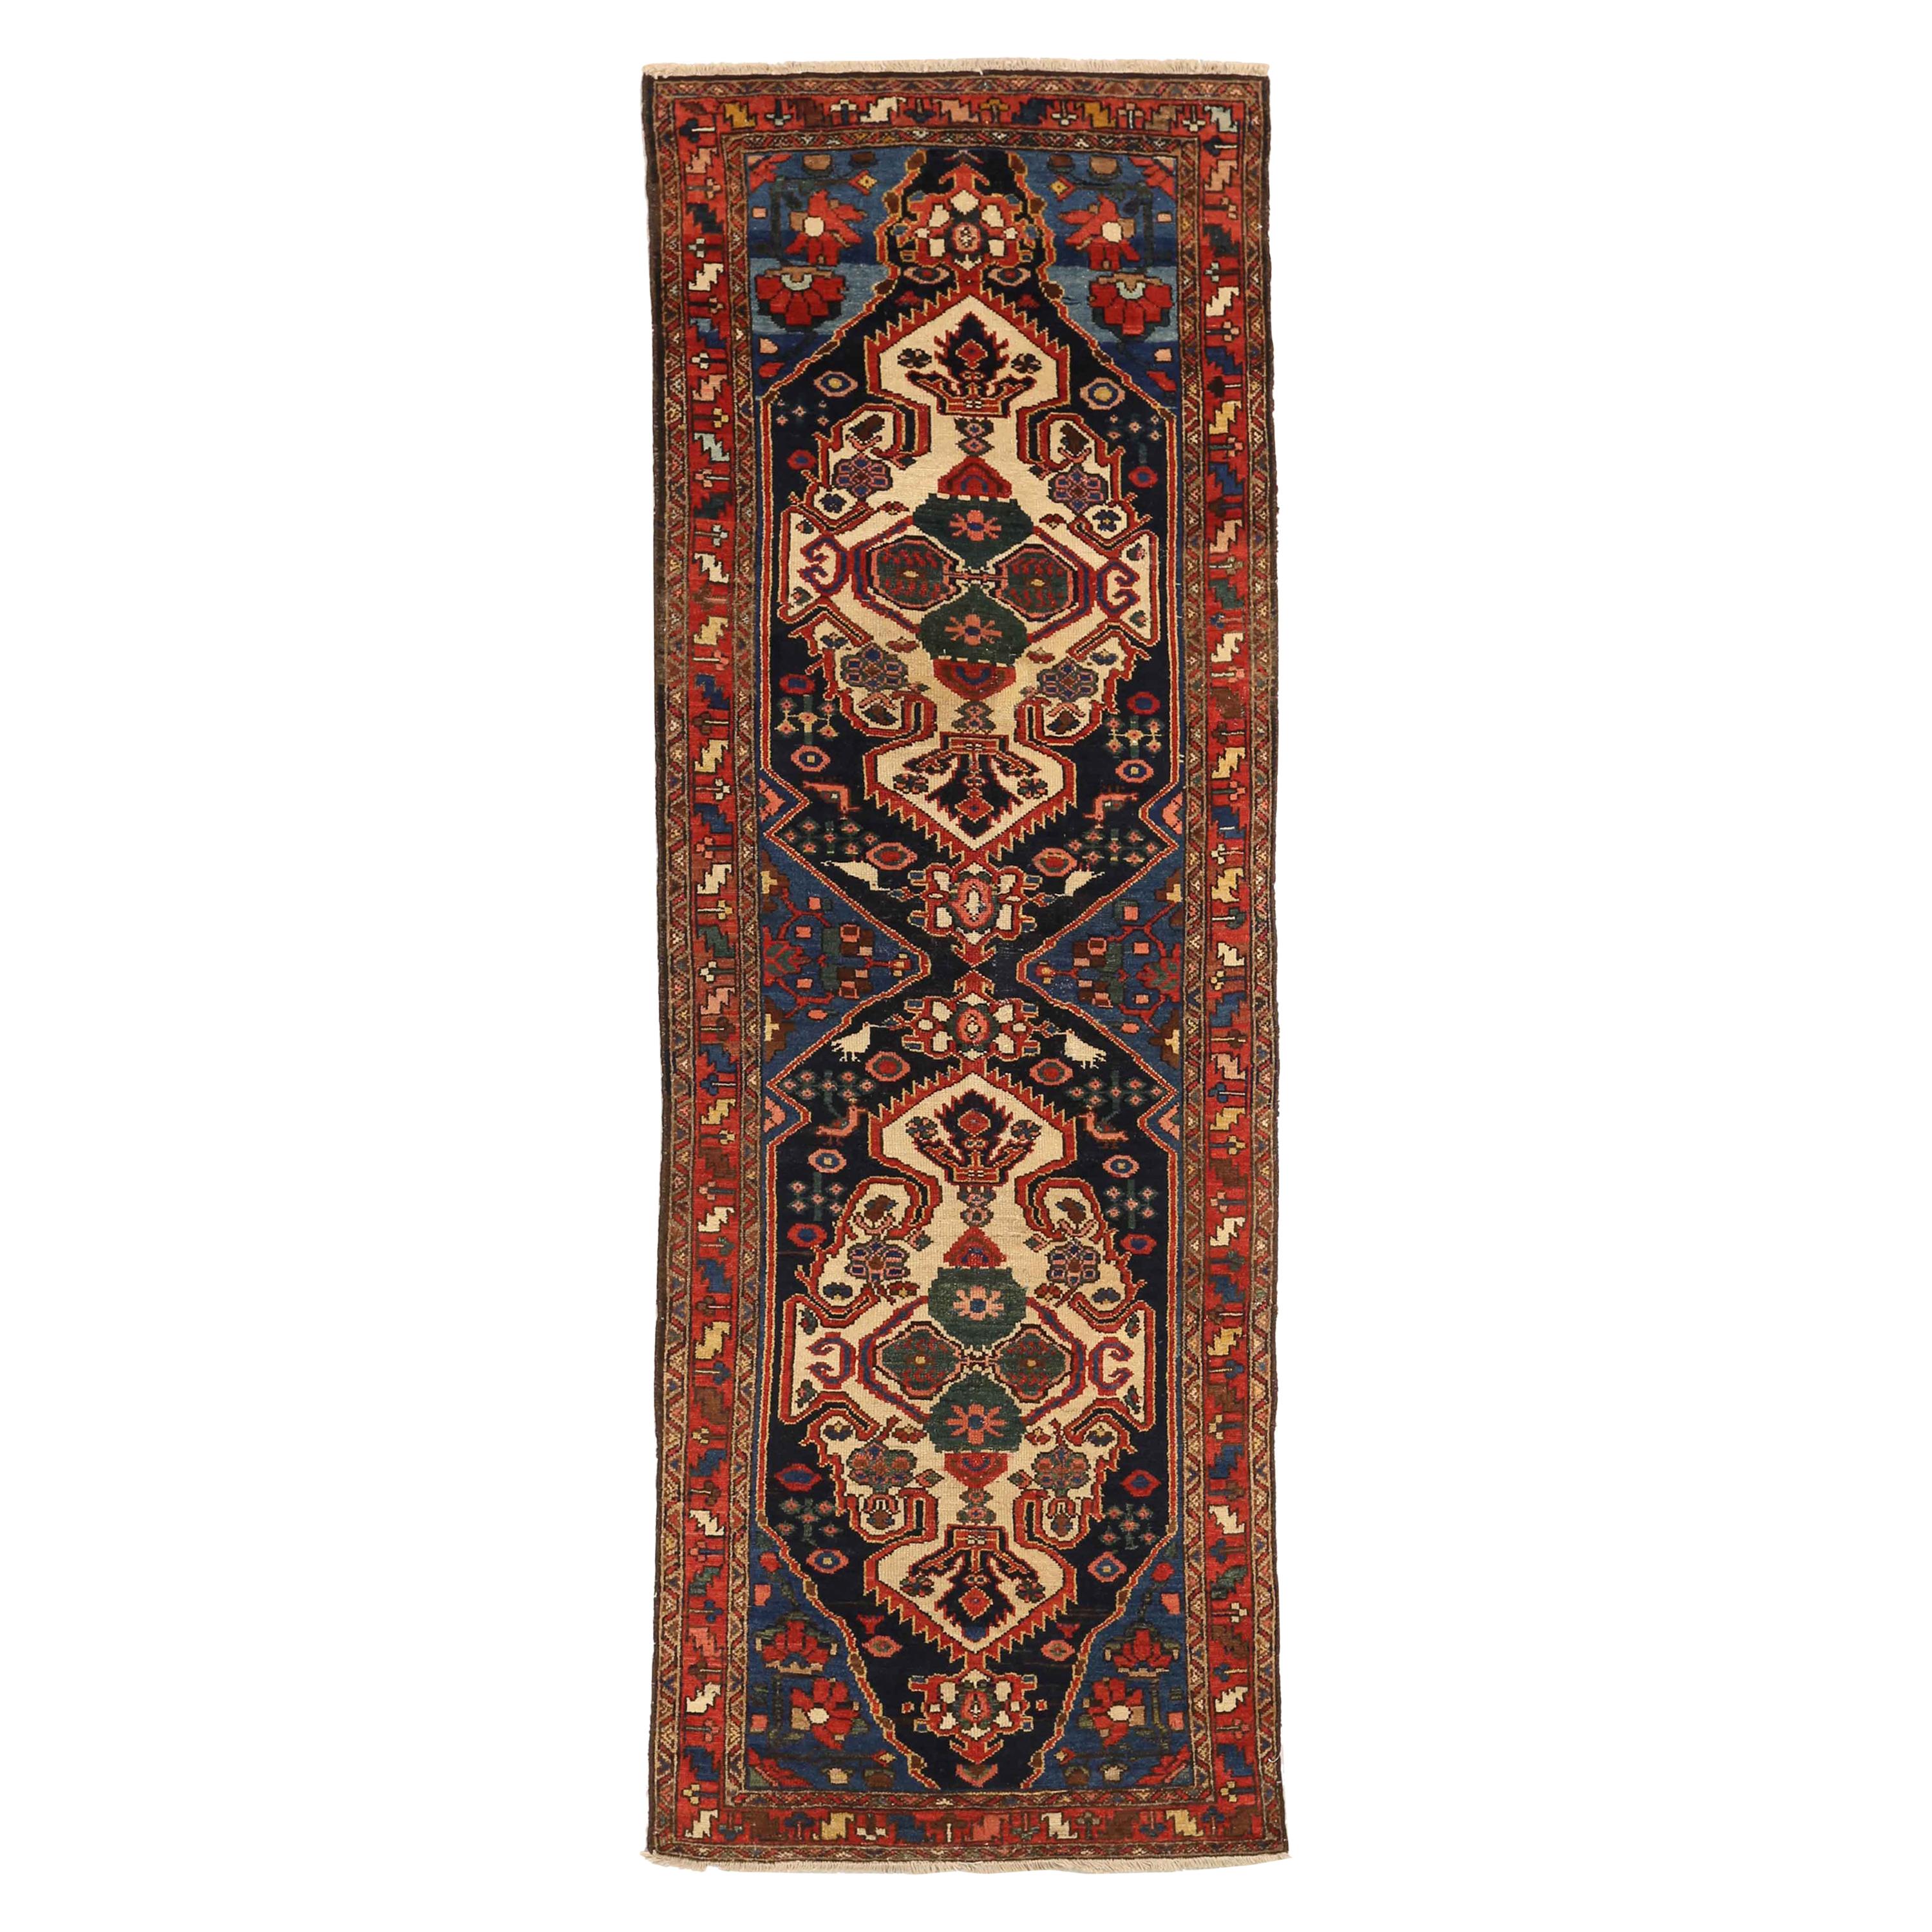 1950s Antique Persian Bakhtiar Runner Rug with Ivory & Red Geometric Medallions  For Sale